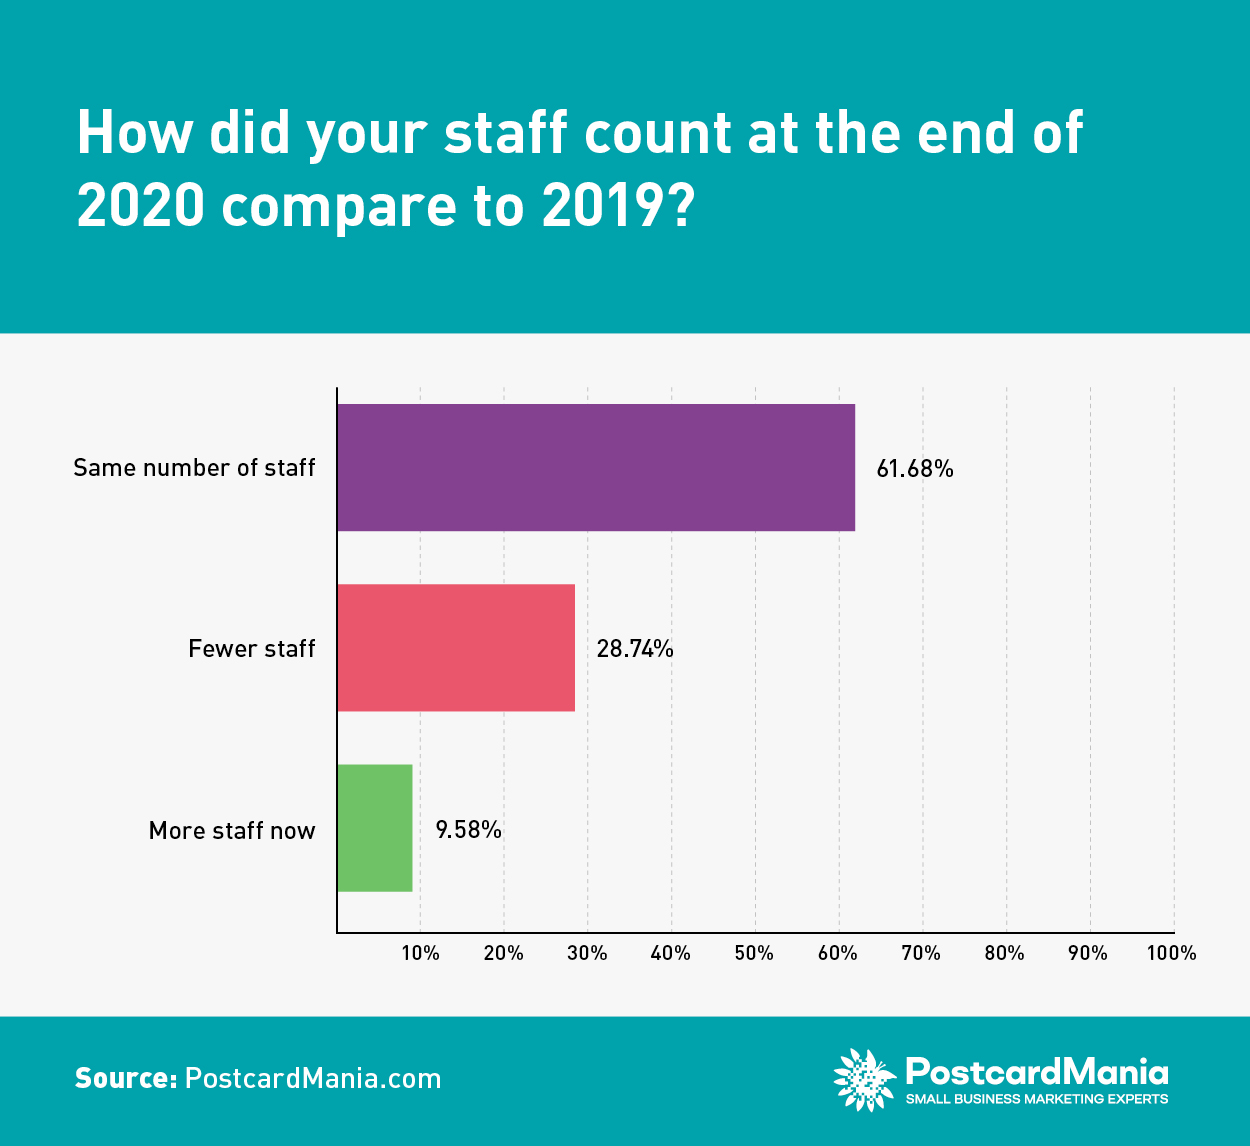 COVID Survey 14 - How did your staff count at the end of 2020 compare to 2019?